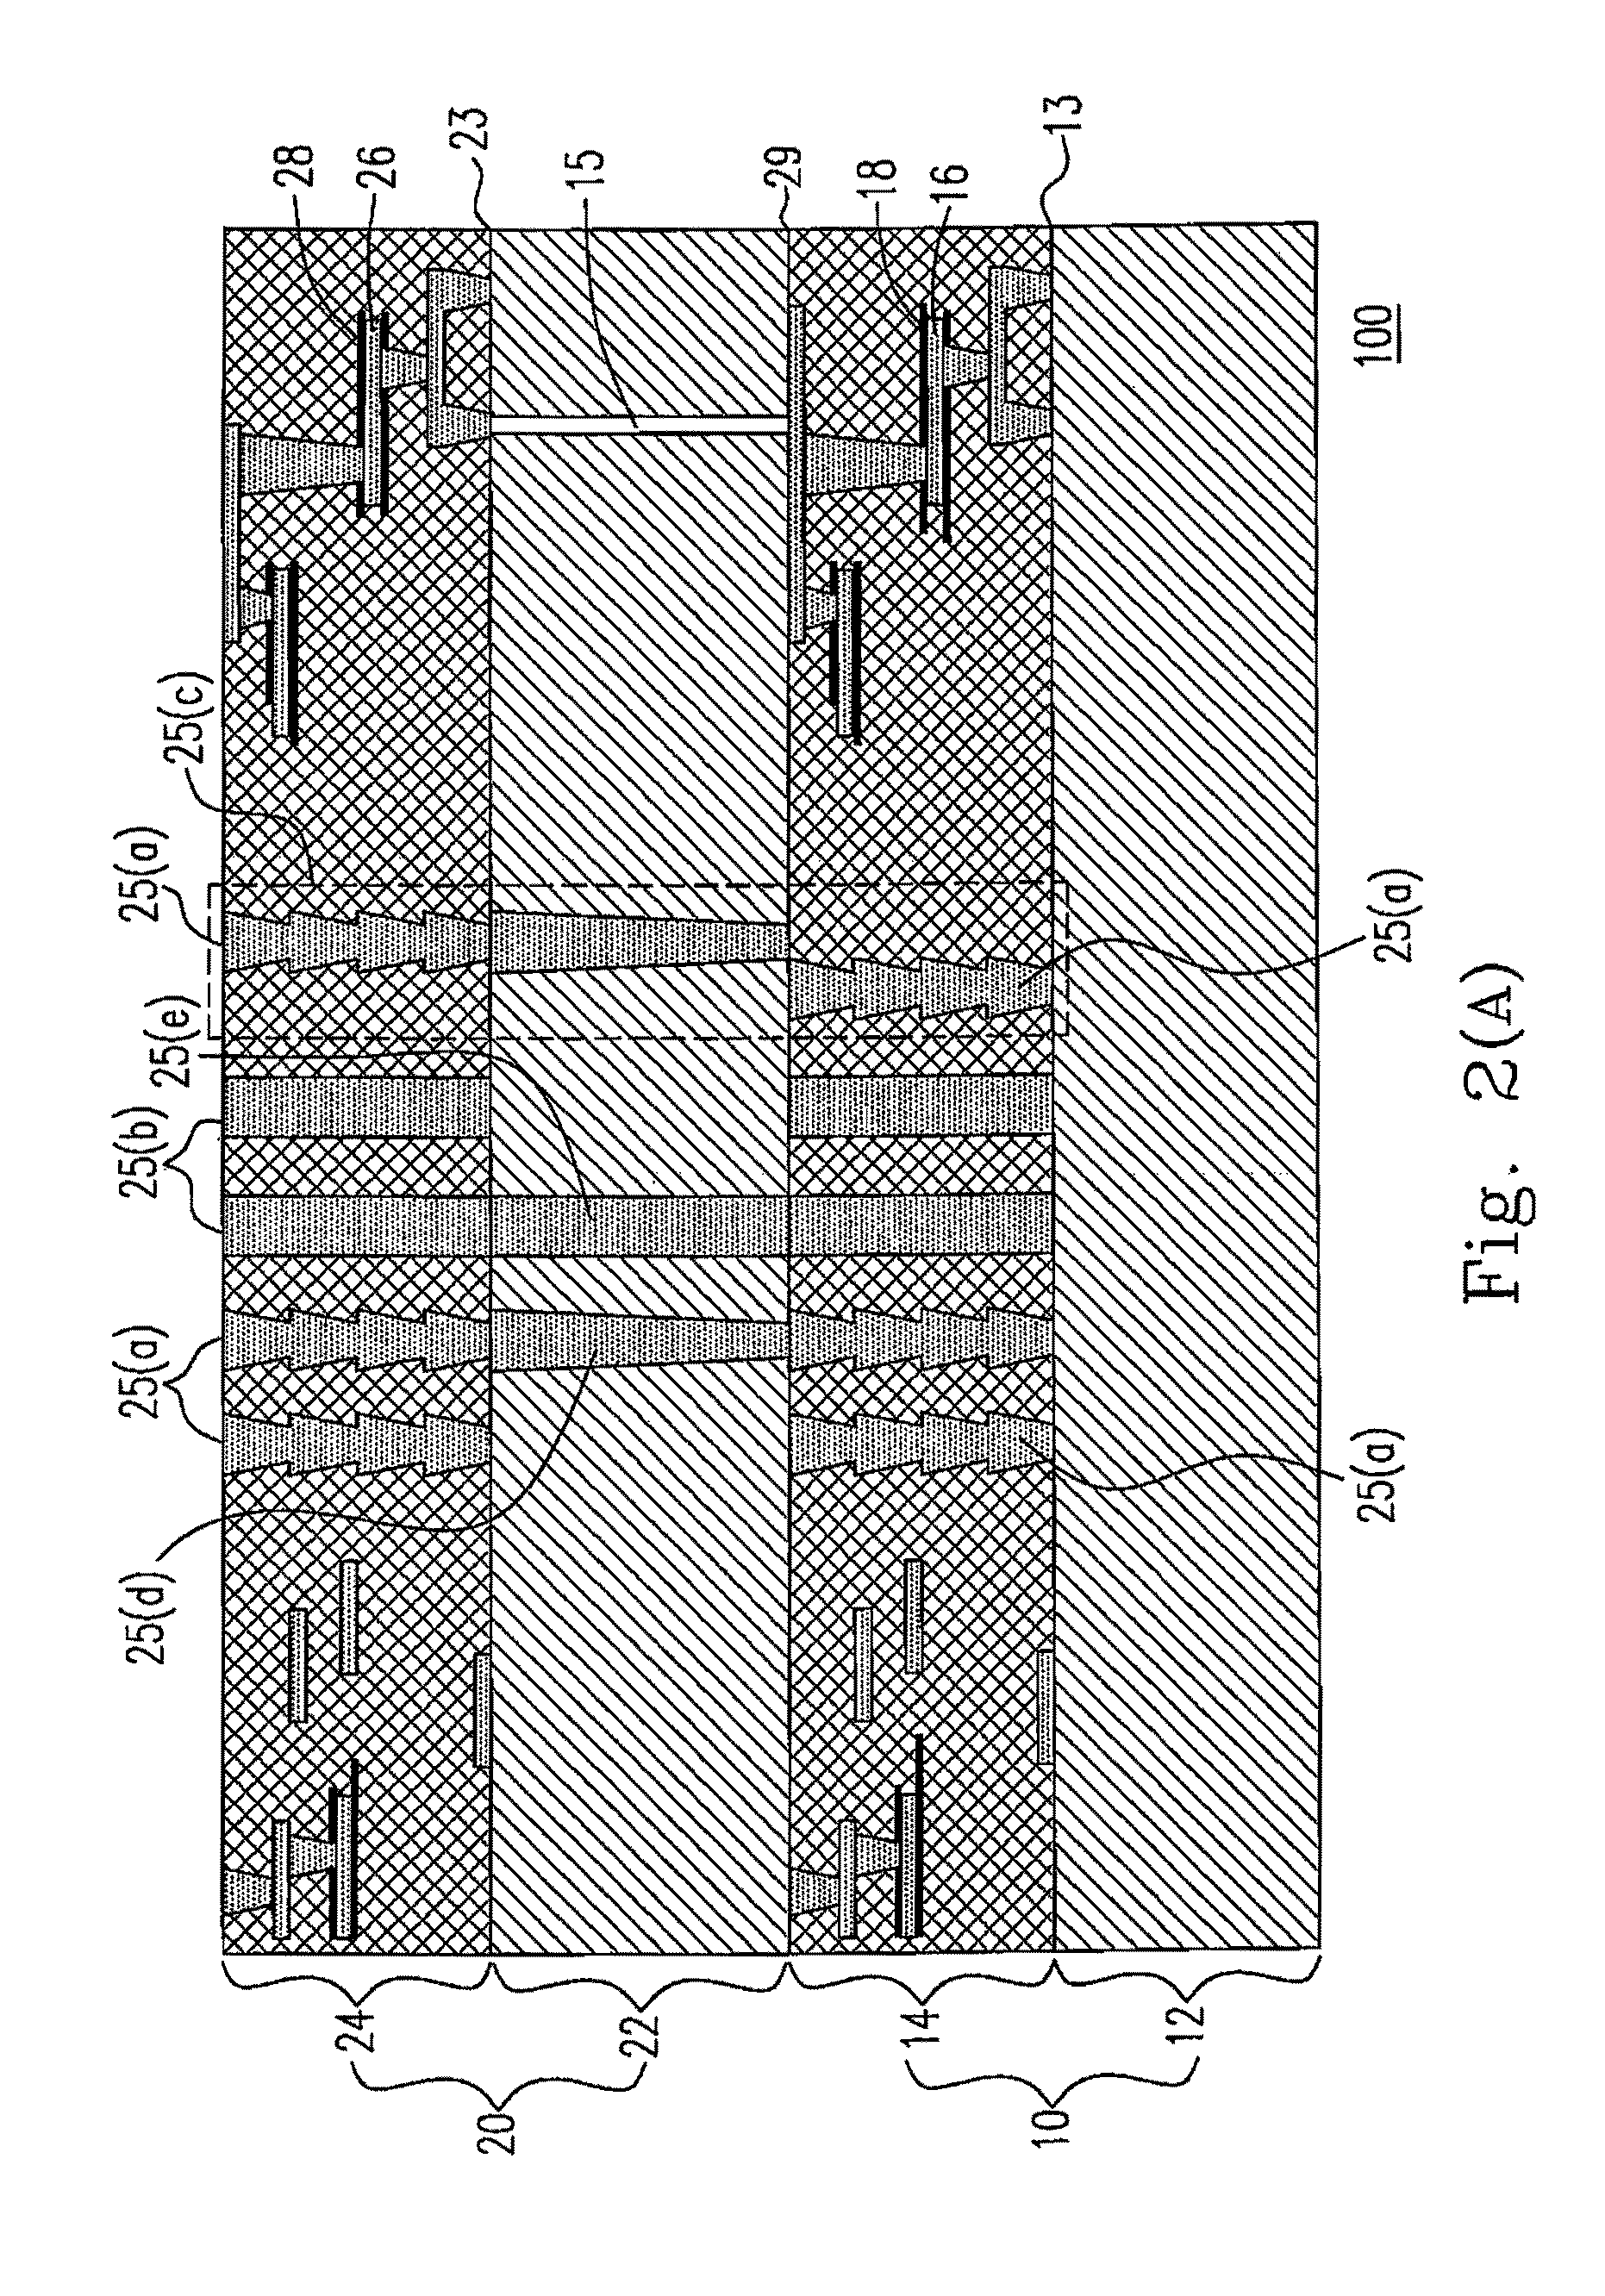 Wafer-to-wafer stack with supporting pedestal